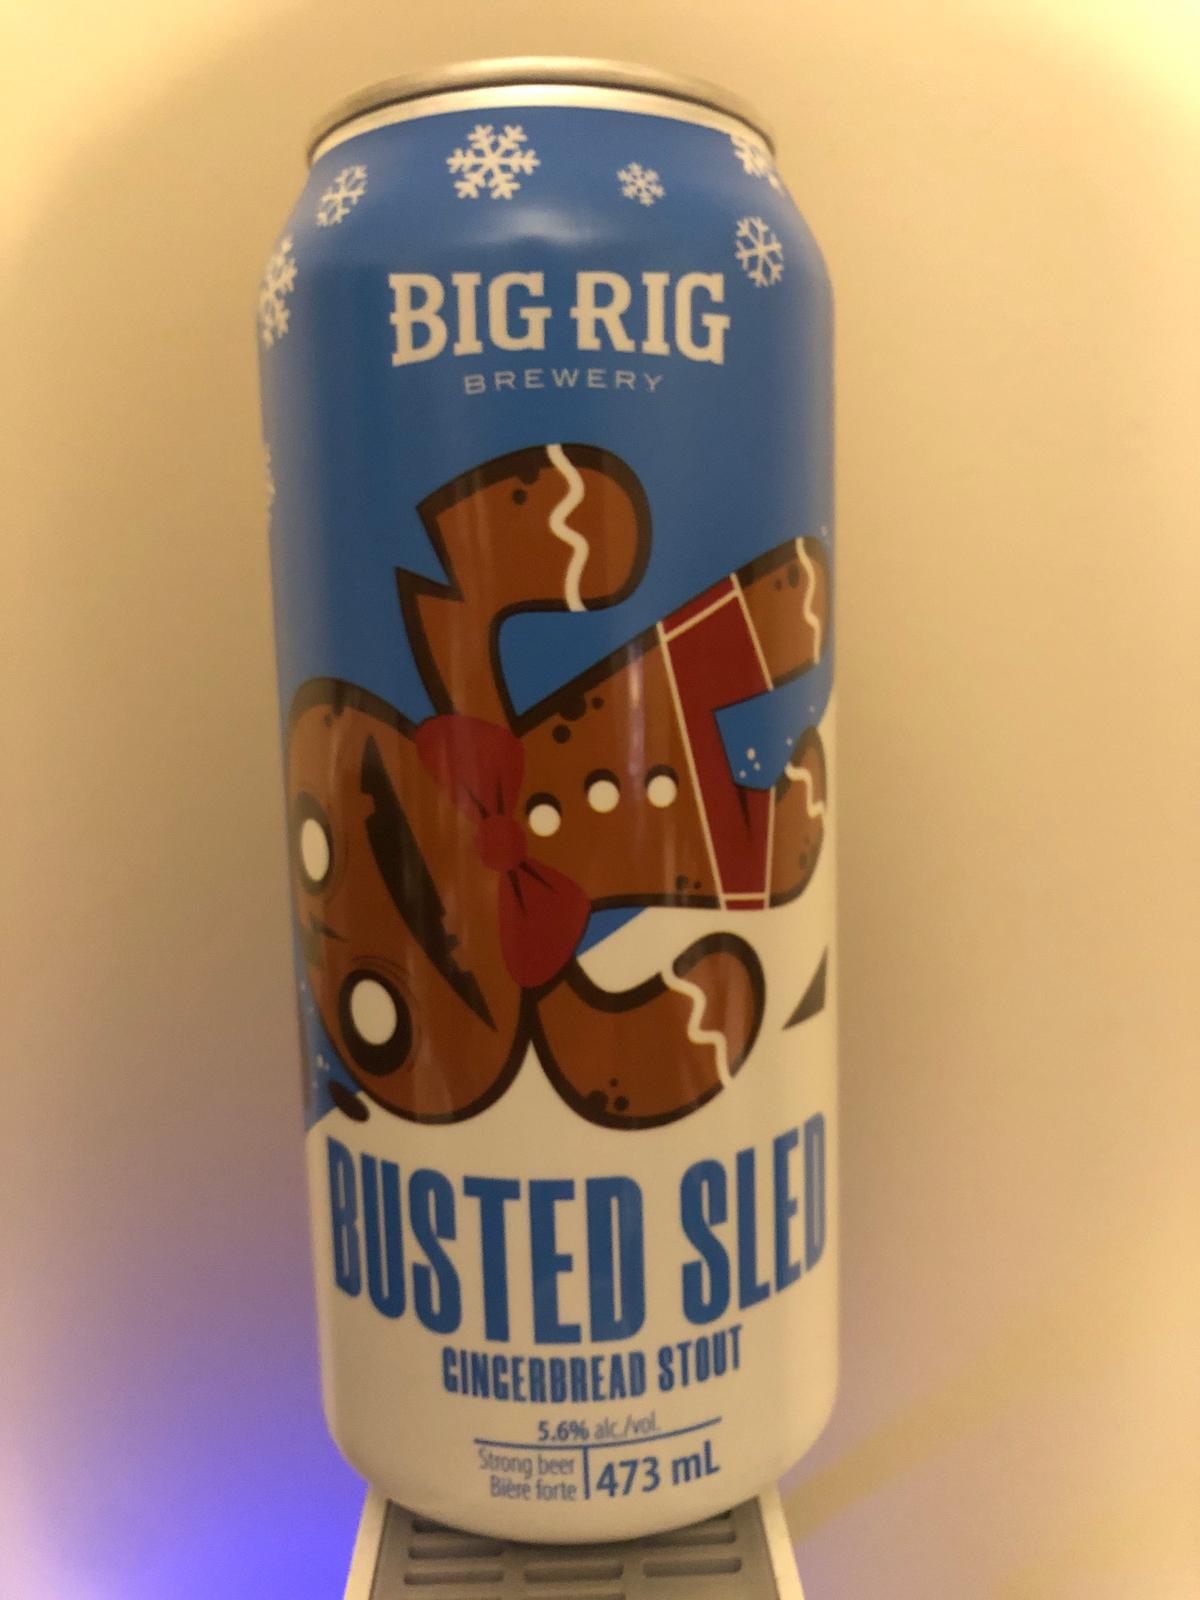 Busted Sled Gingerbread Porter